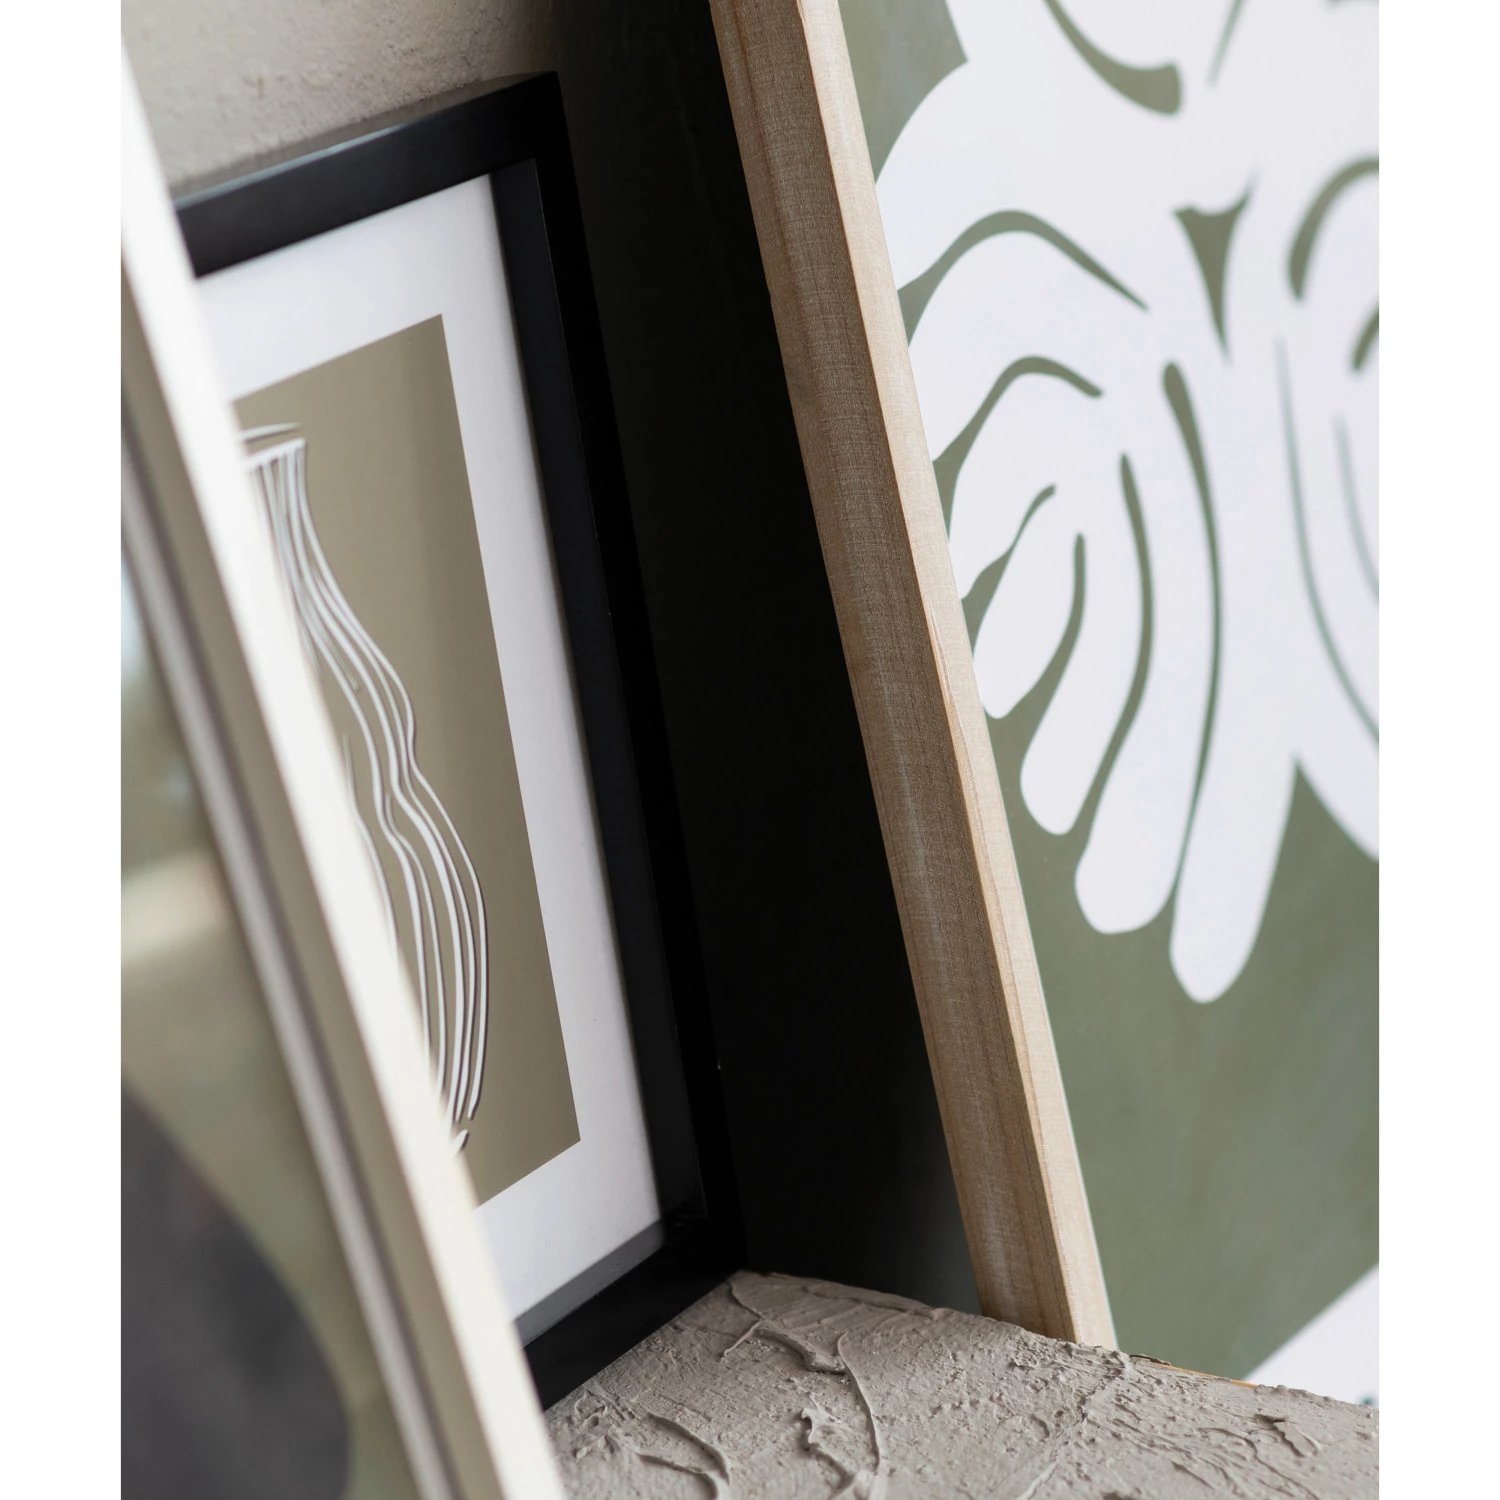  Wood Framed Glass Wall Décor with Vase Print, Beige and White - Image 1